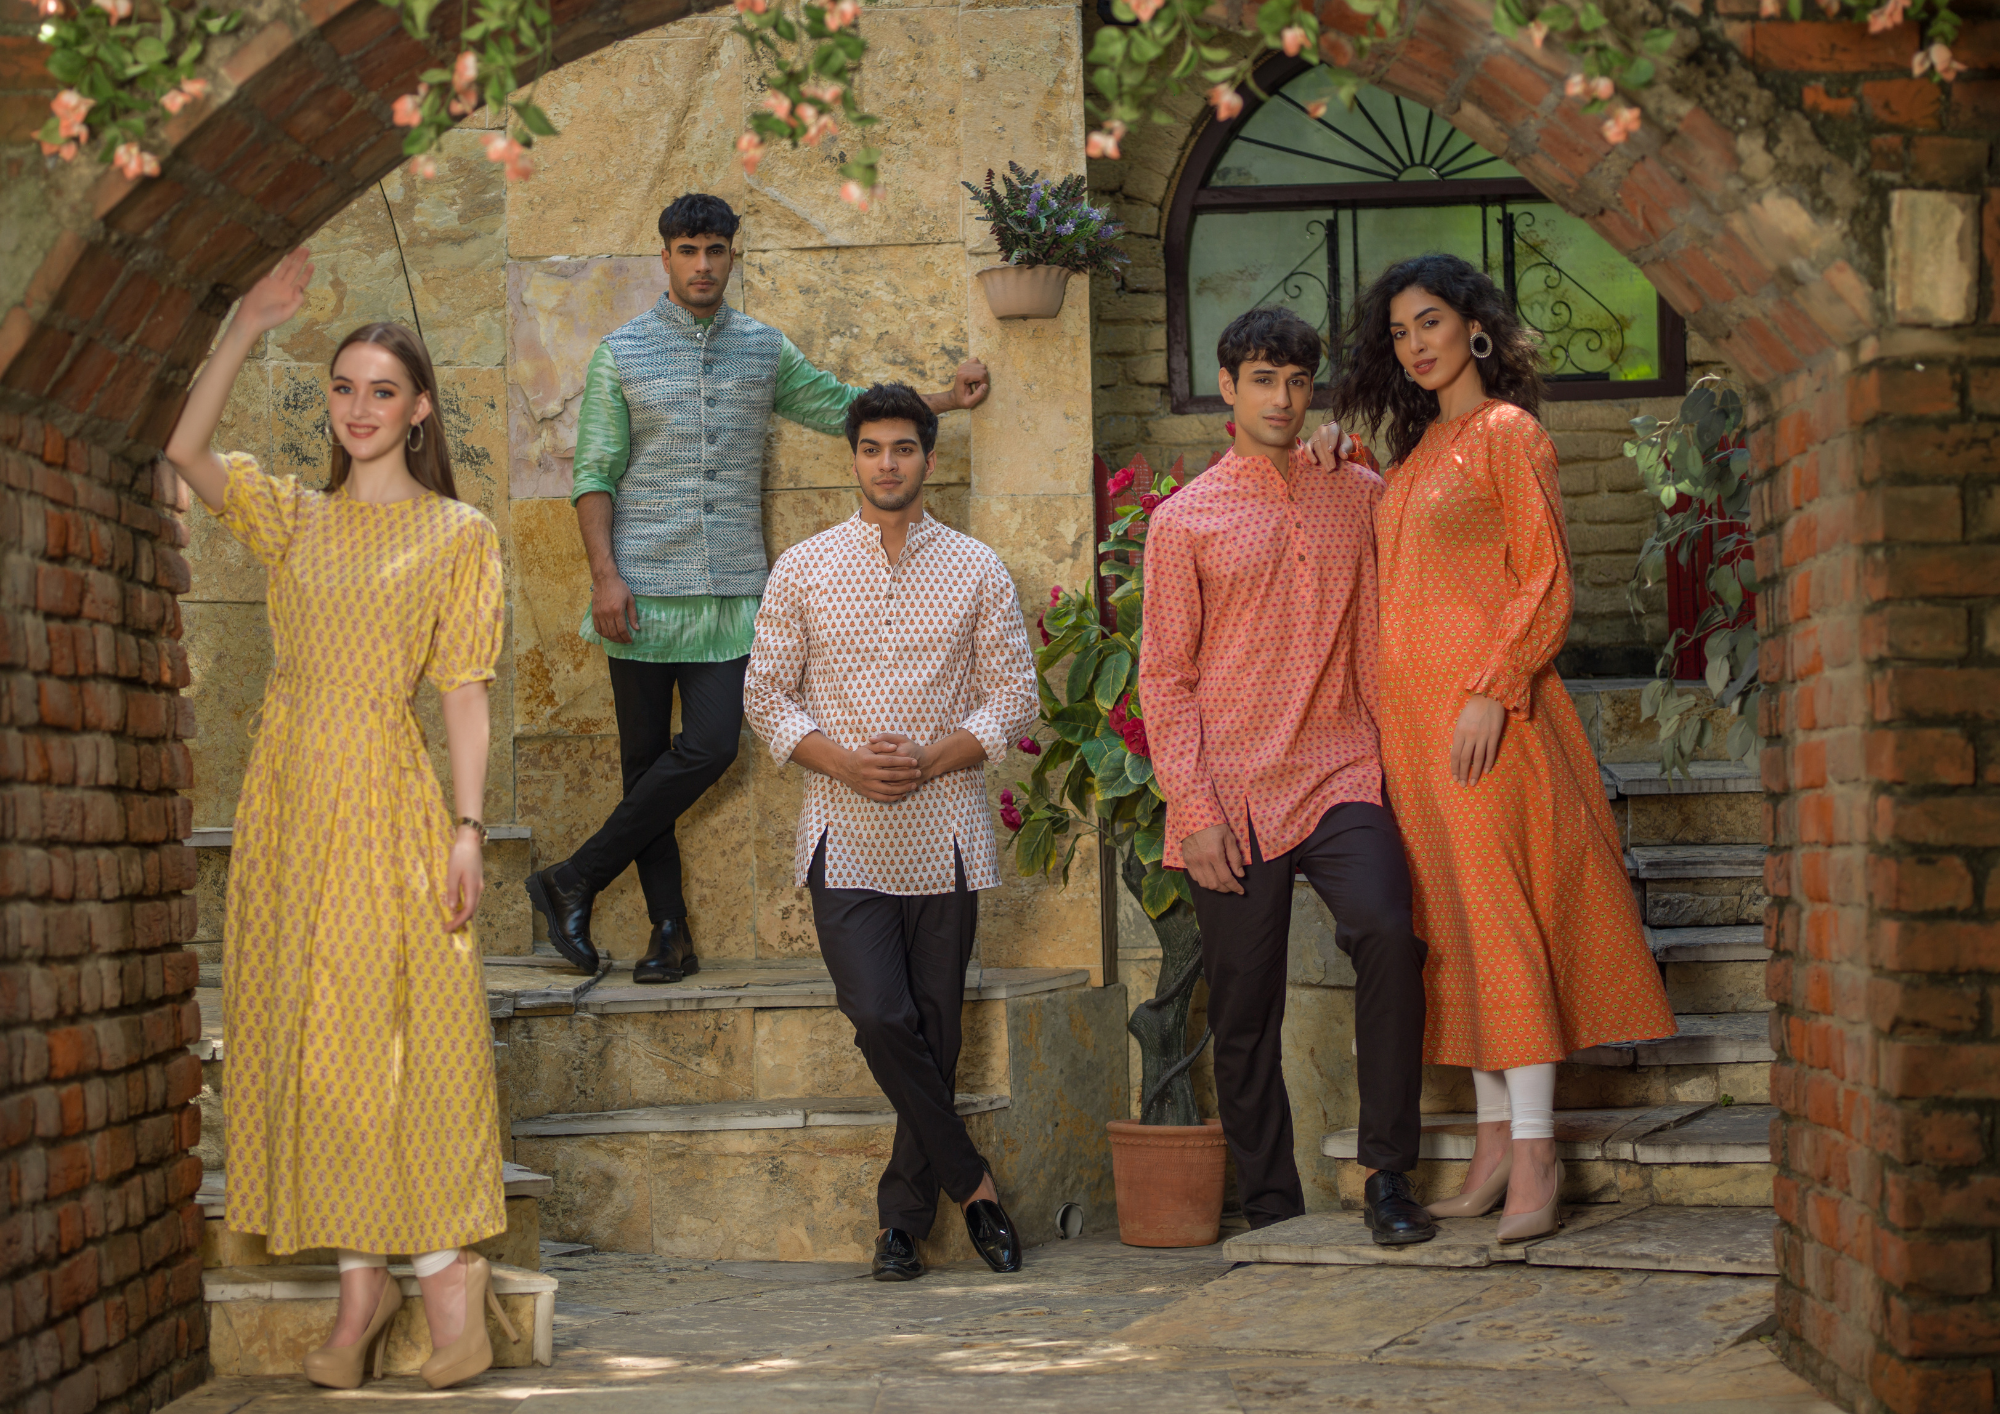 See Designs, an Indian Ethnic wear brand, caters to Indian men & women seeking comfort.